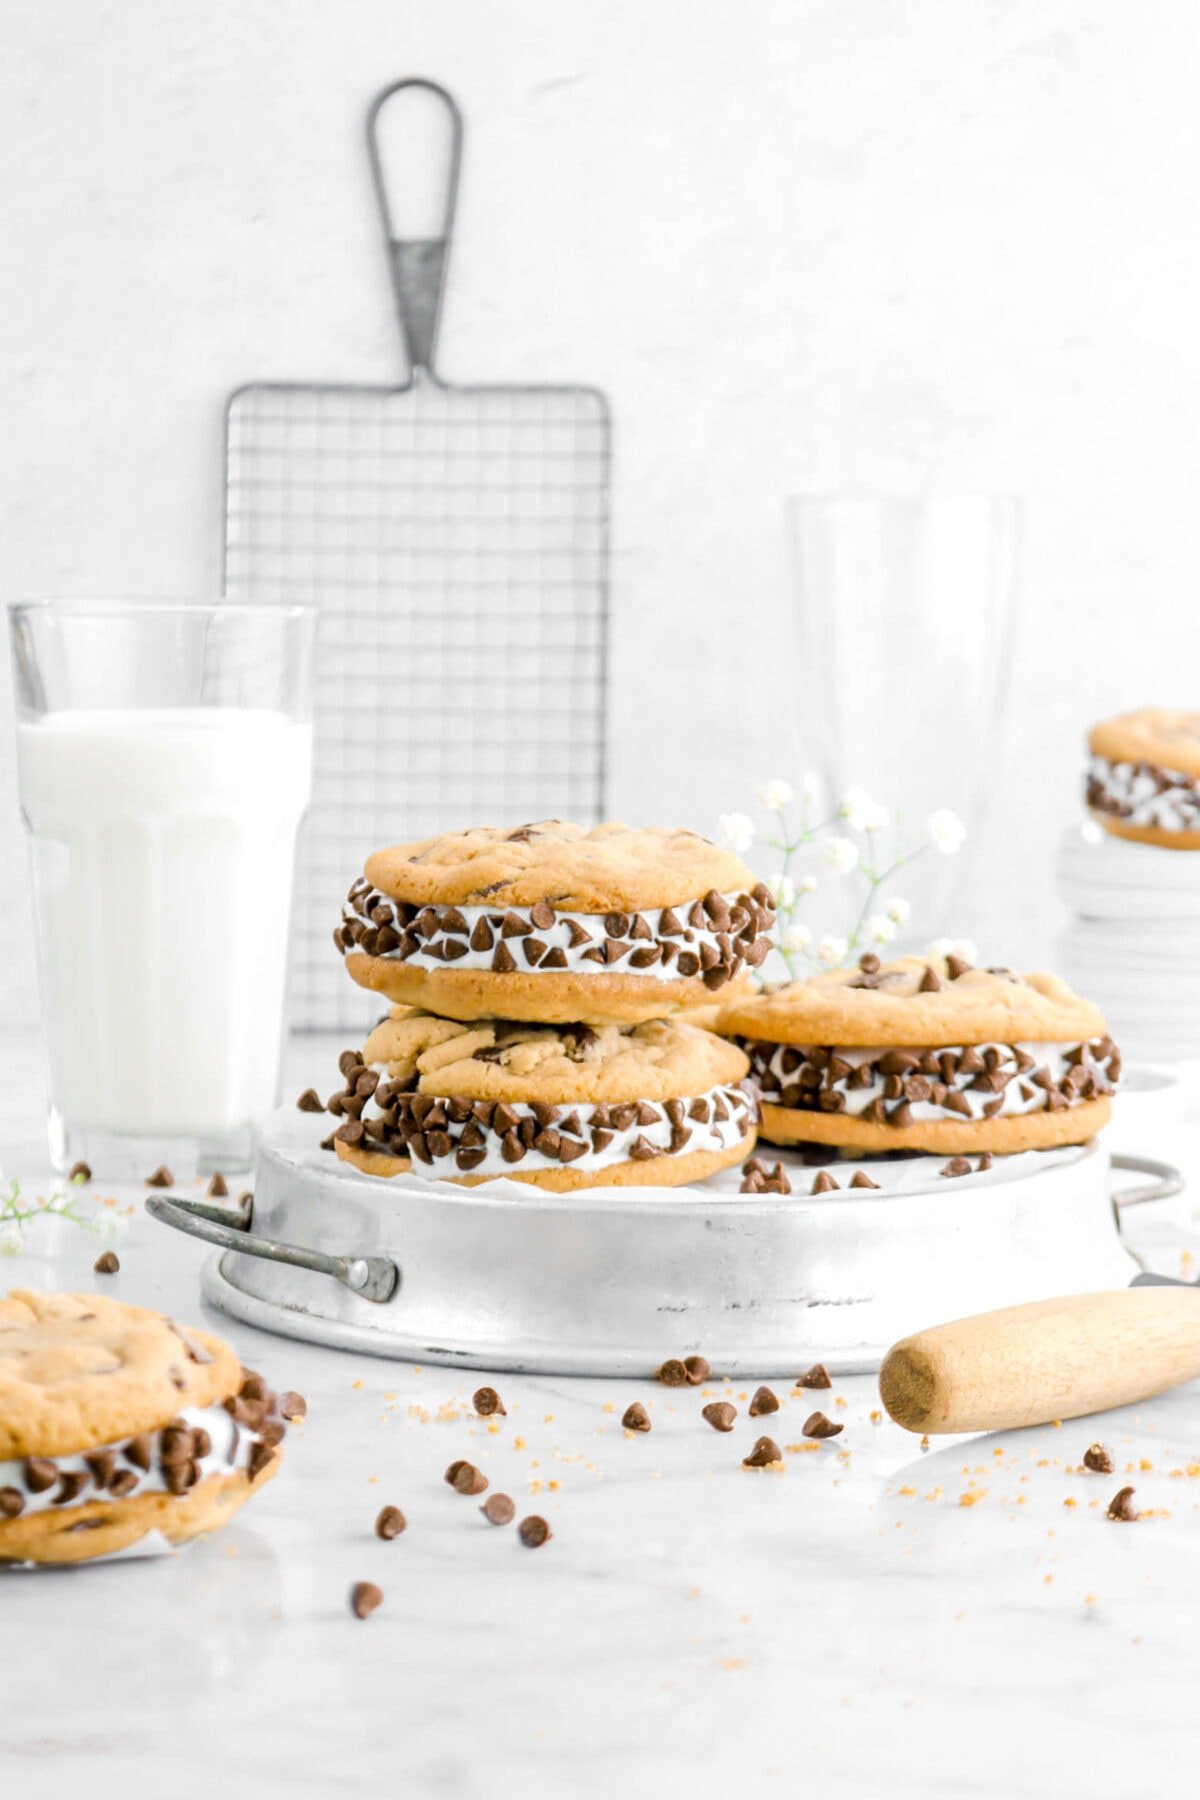 stacked ice cream sanwiches on upside down pie plate with more cookies around, chocolate chips on marble surface with glass of milk and stack of plates behind